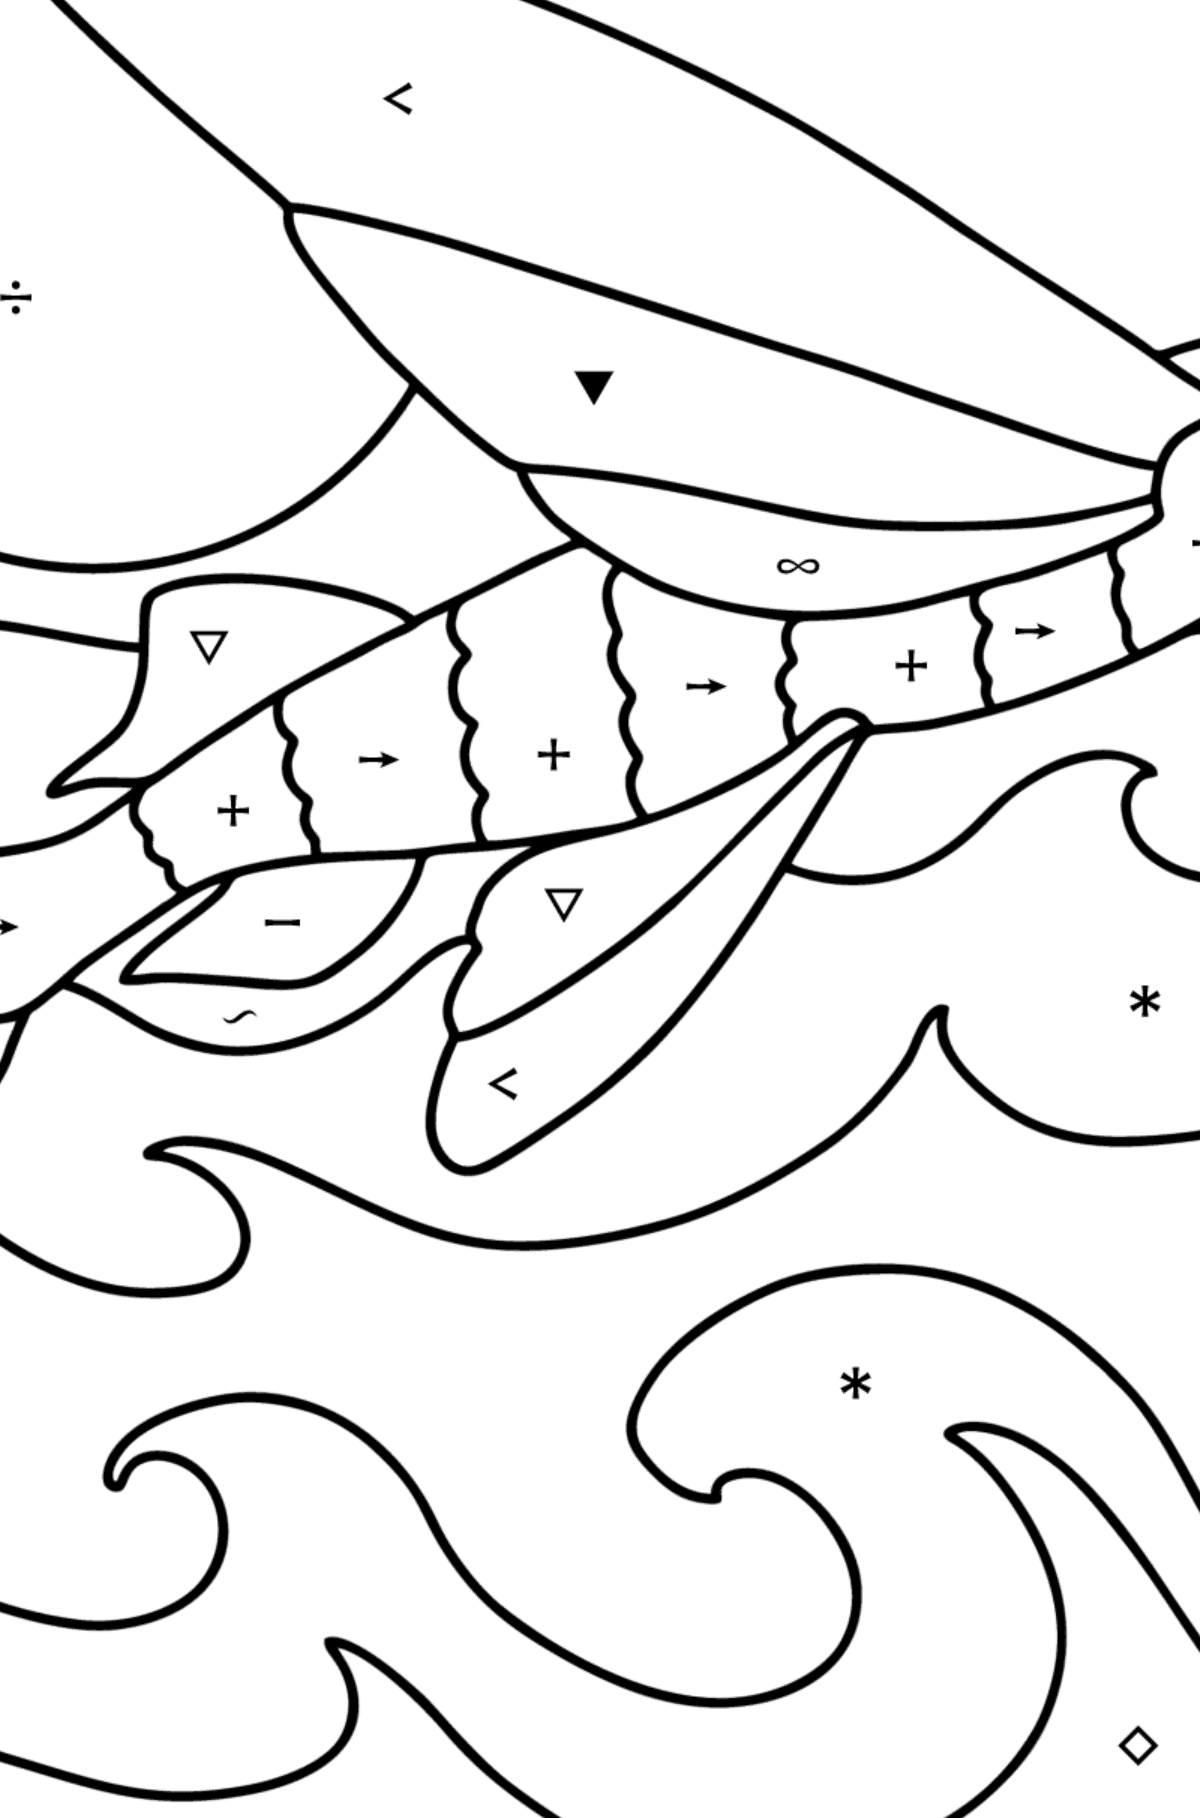 Flying fish coloring page - Coloring by Symbols for Kids